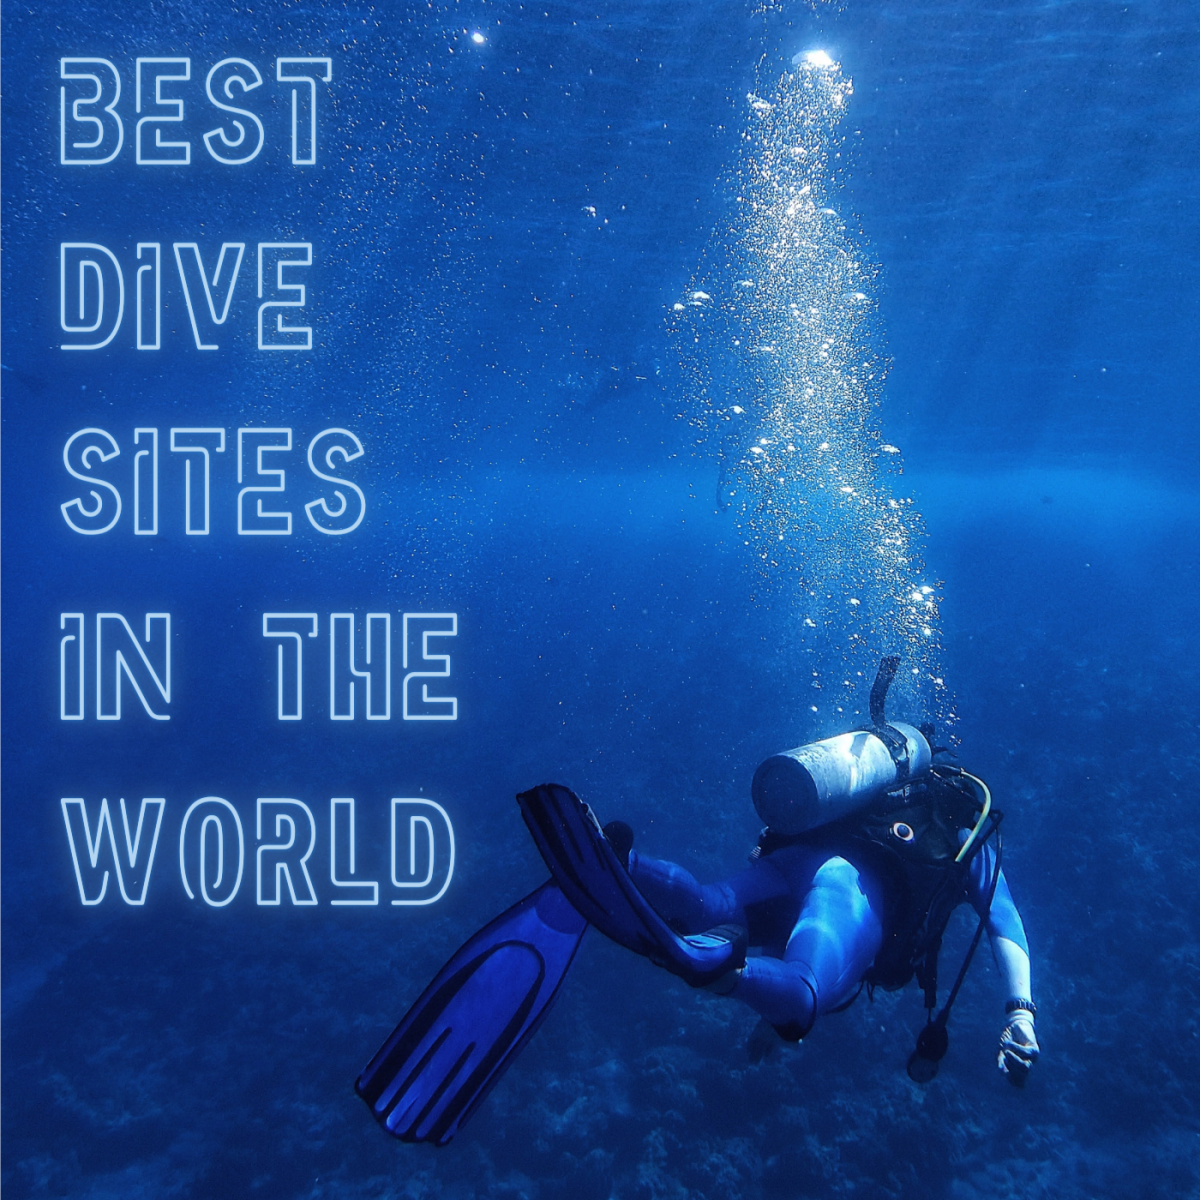 The 10 Best Dive Sites Around the World